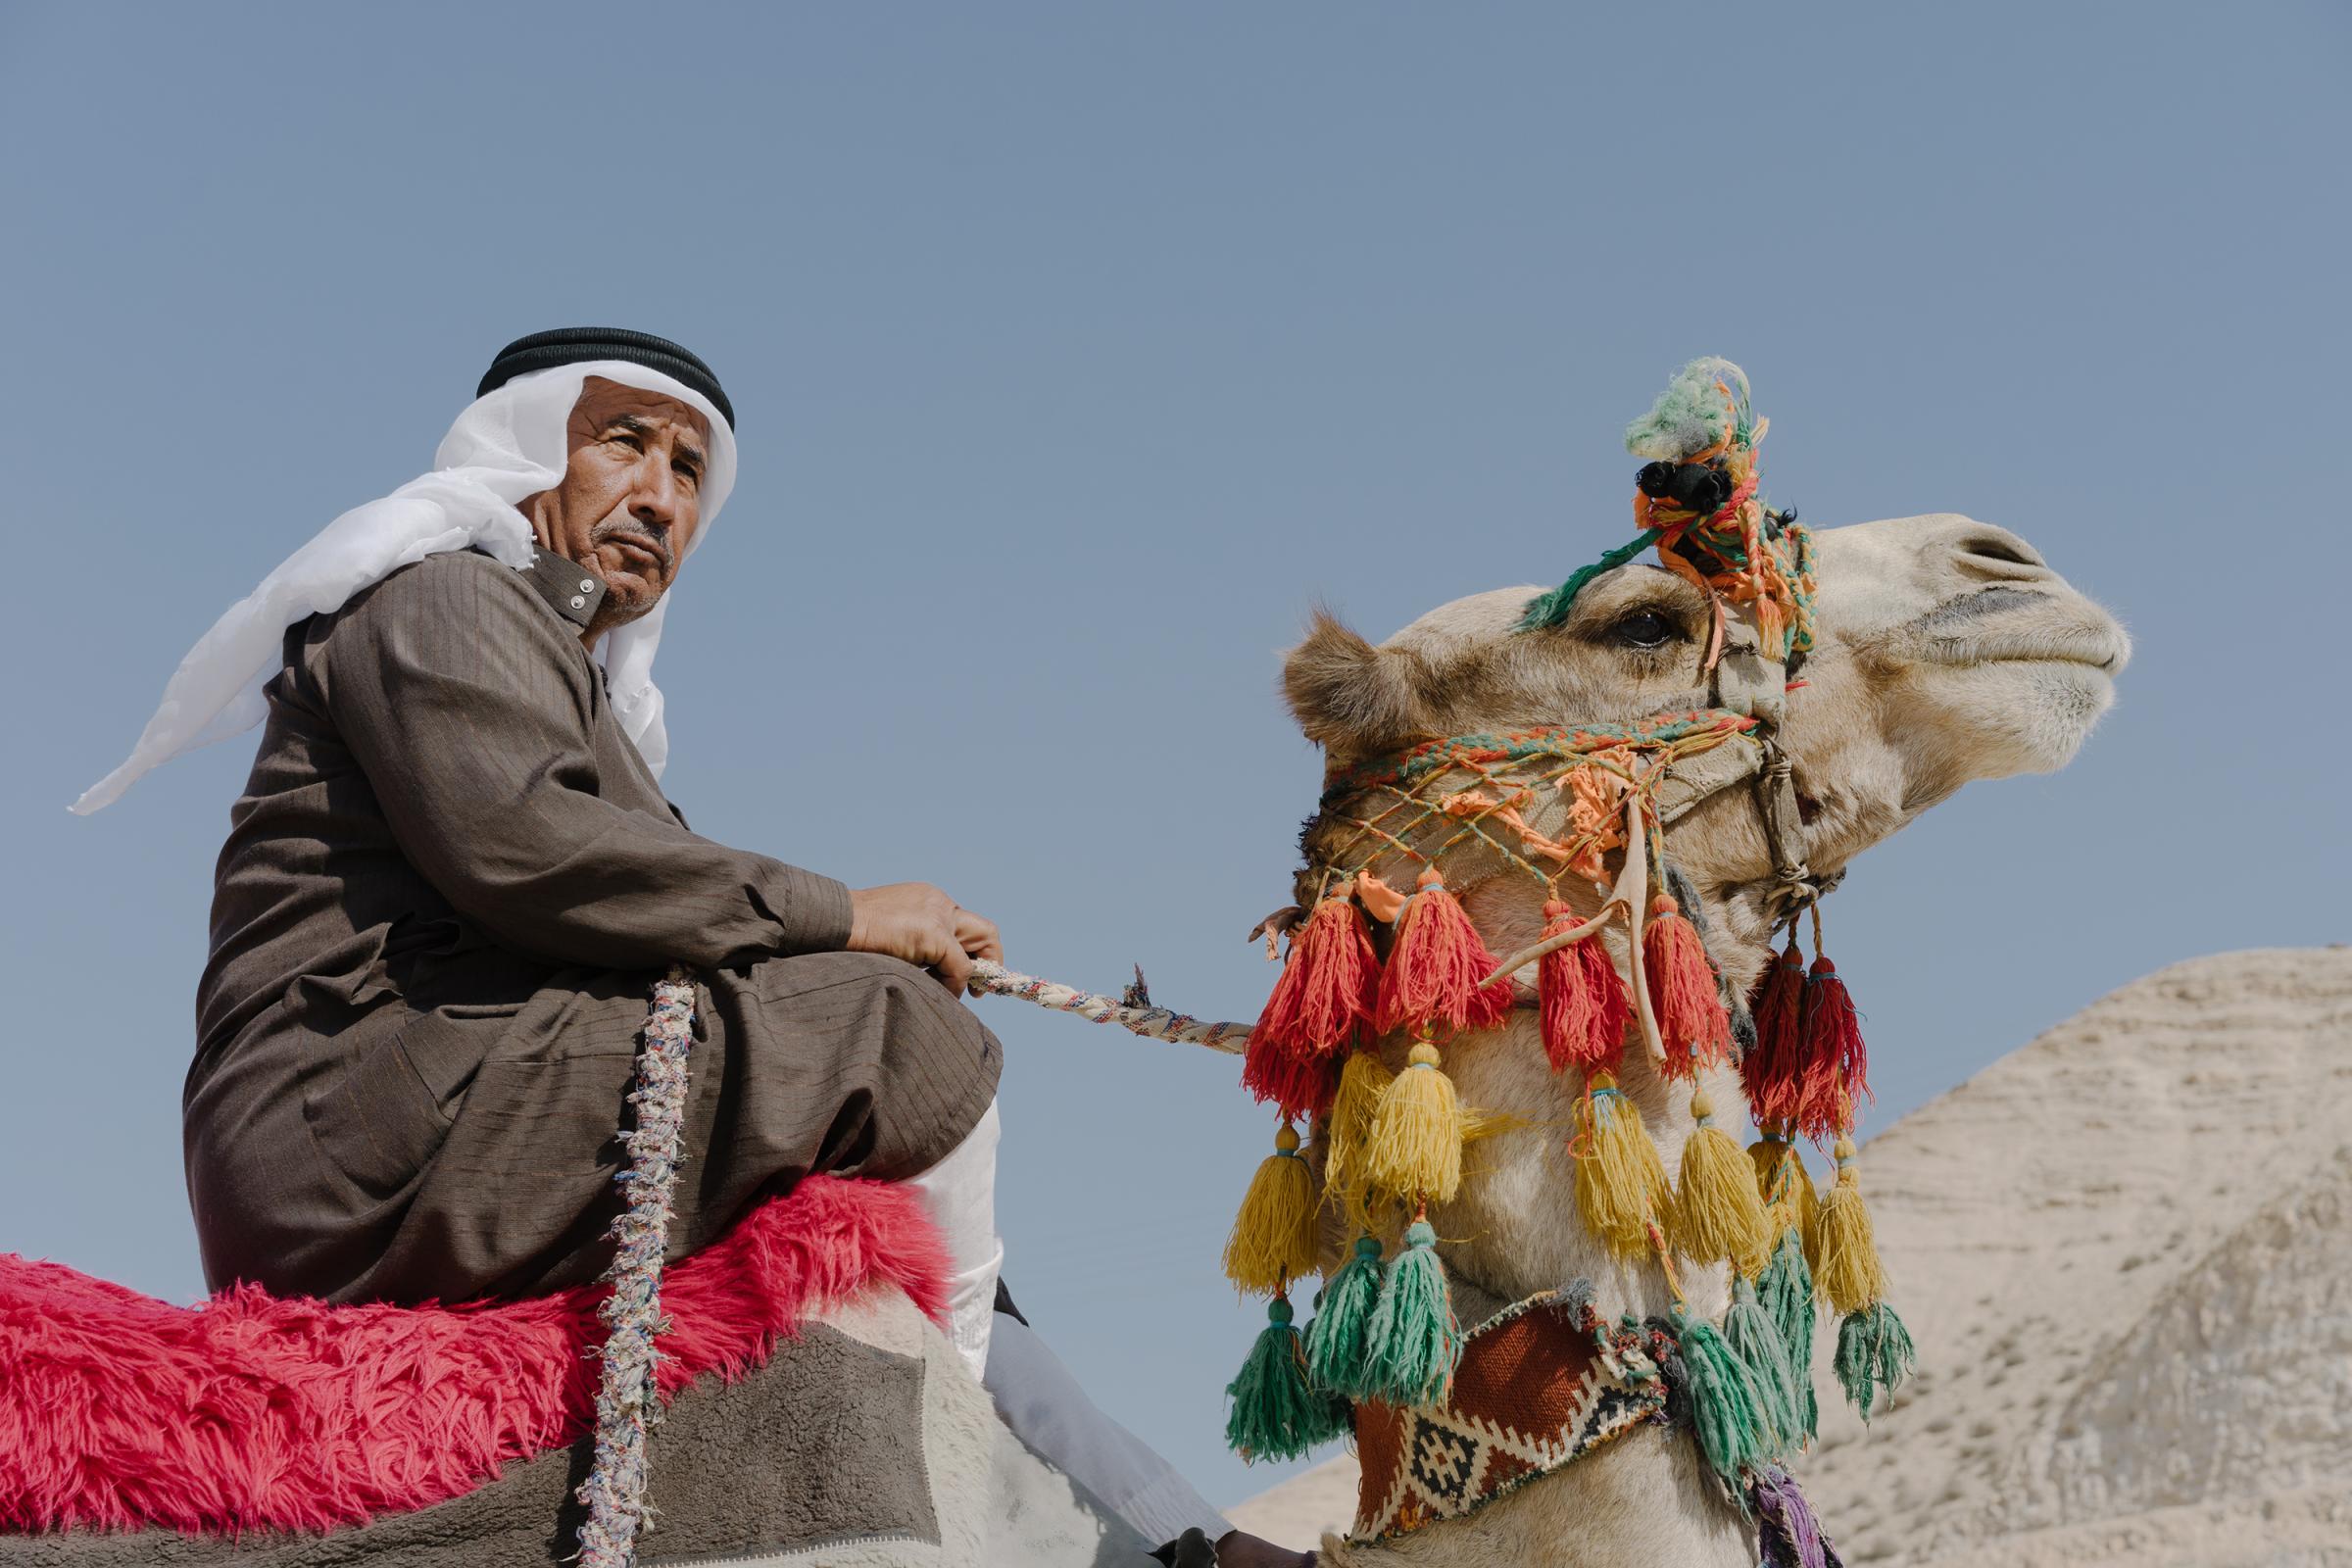 NPR - What is killing the Dead Sea? - Bedouins operate camel tours as a tourist attraction on...